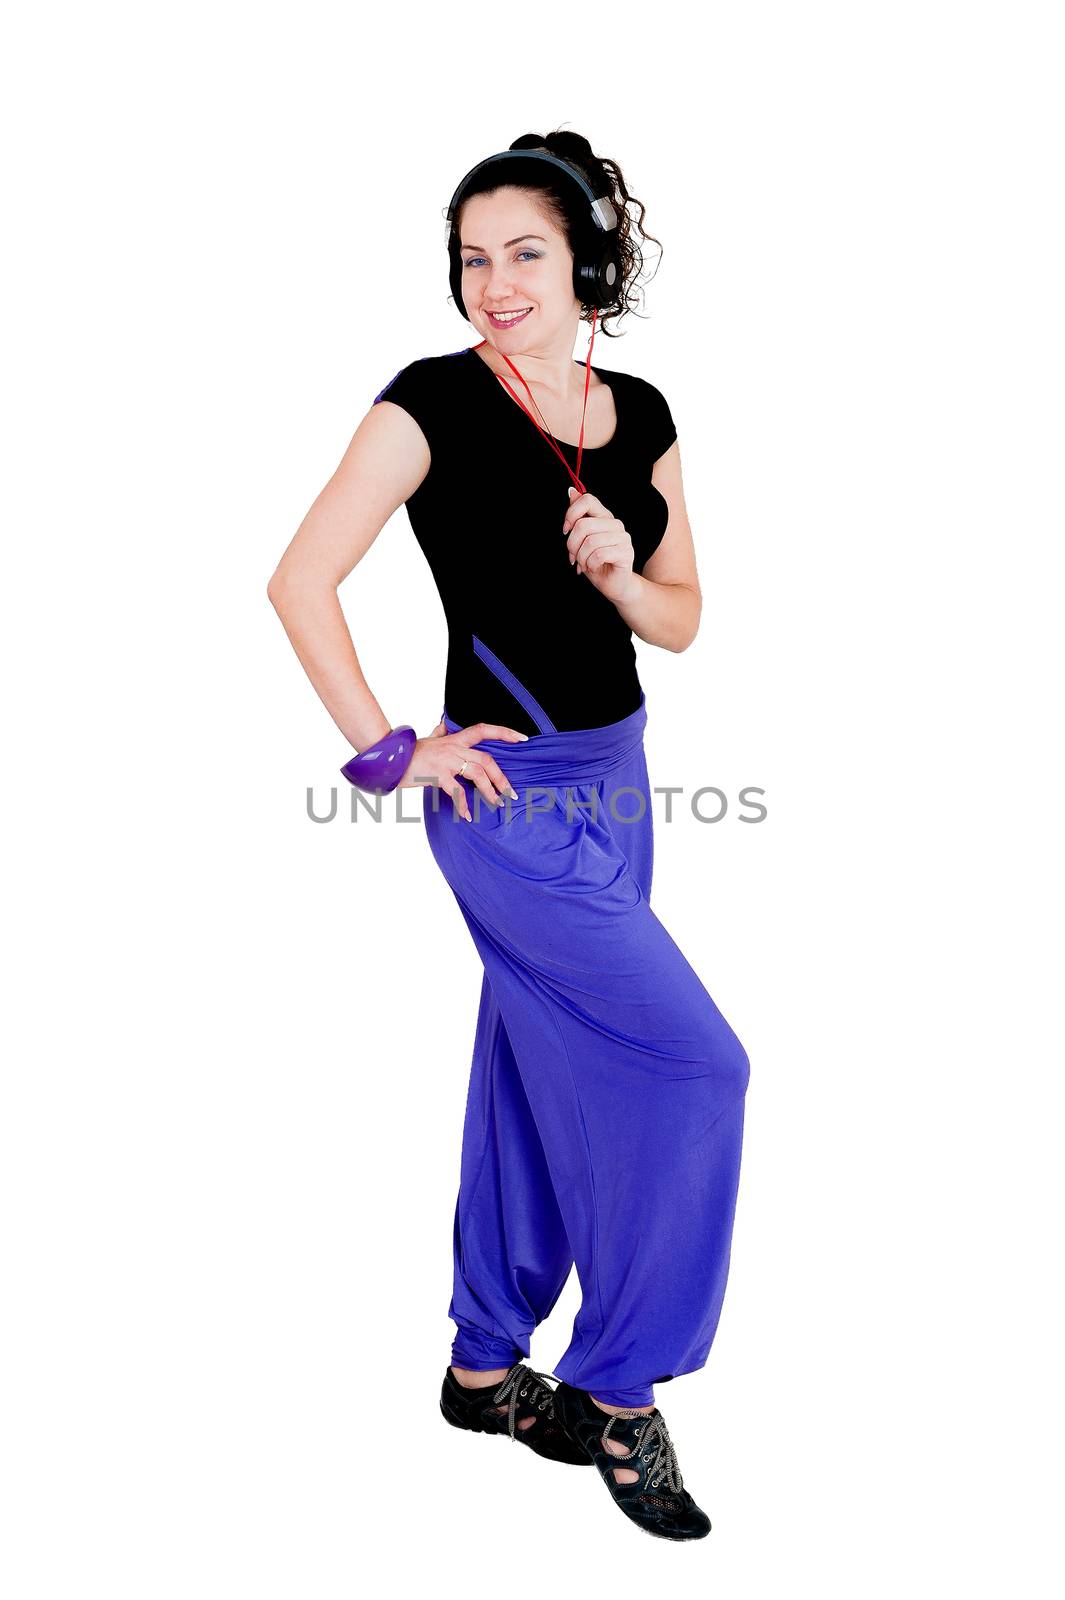 Isolate against white background. Girl doing exercises dancing to the music 